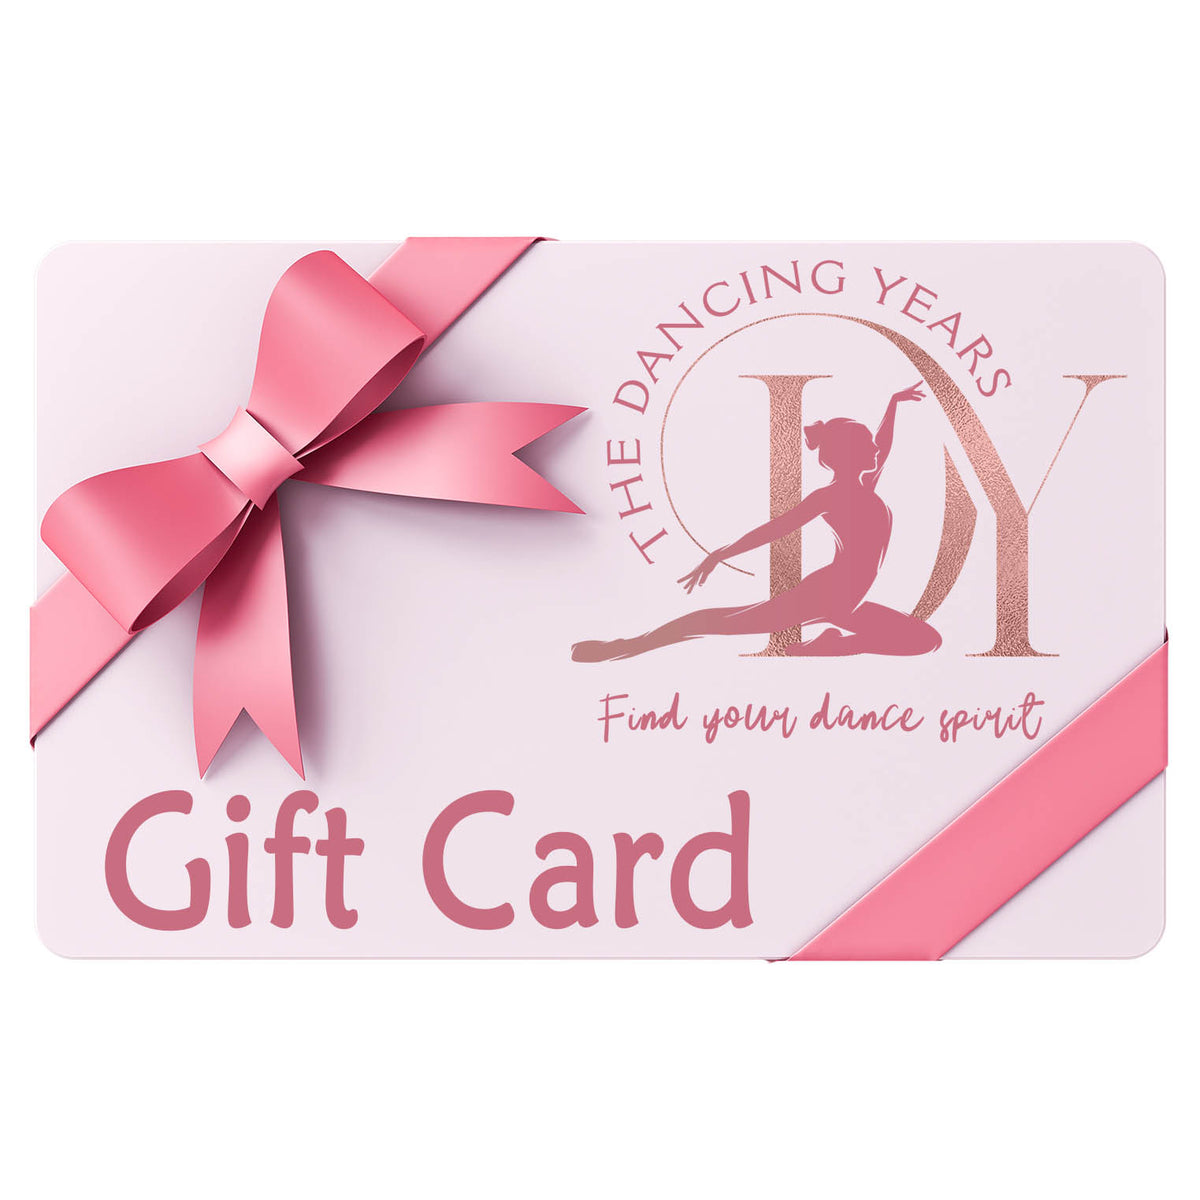 The Dancing Years Gift Card